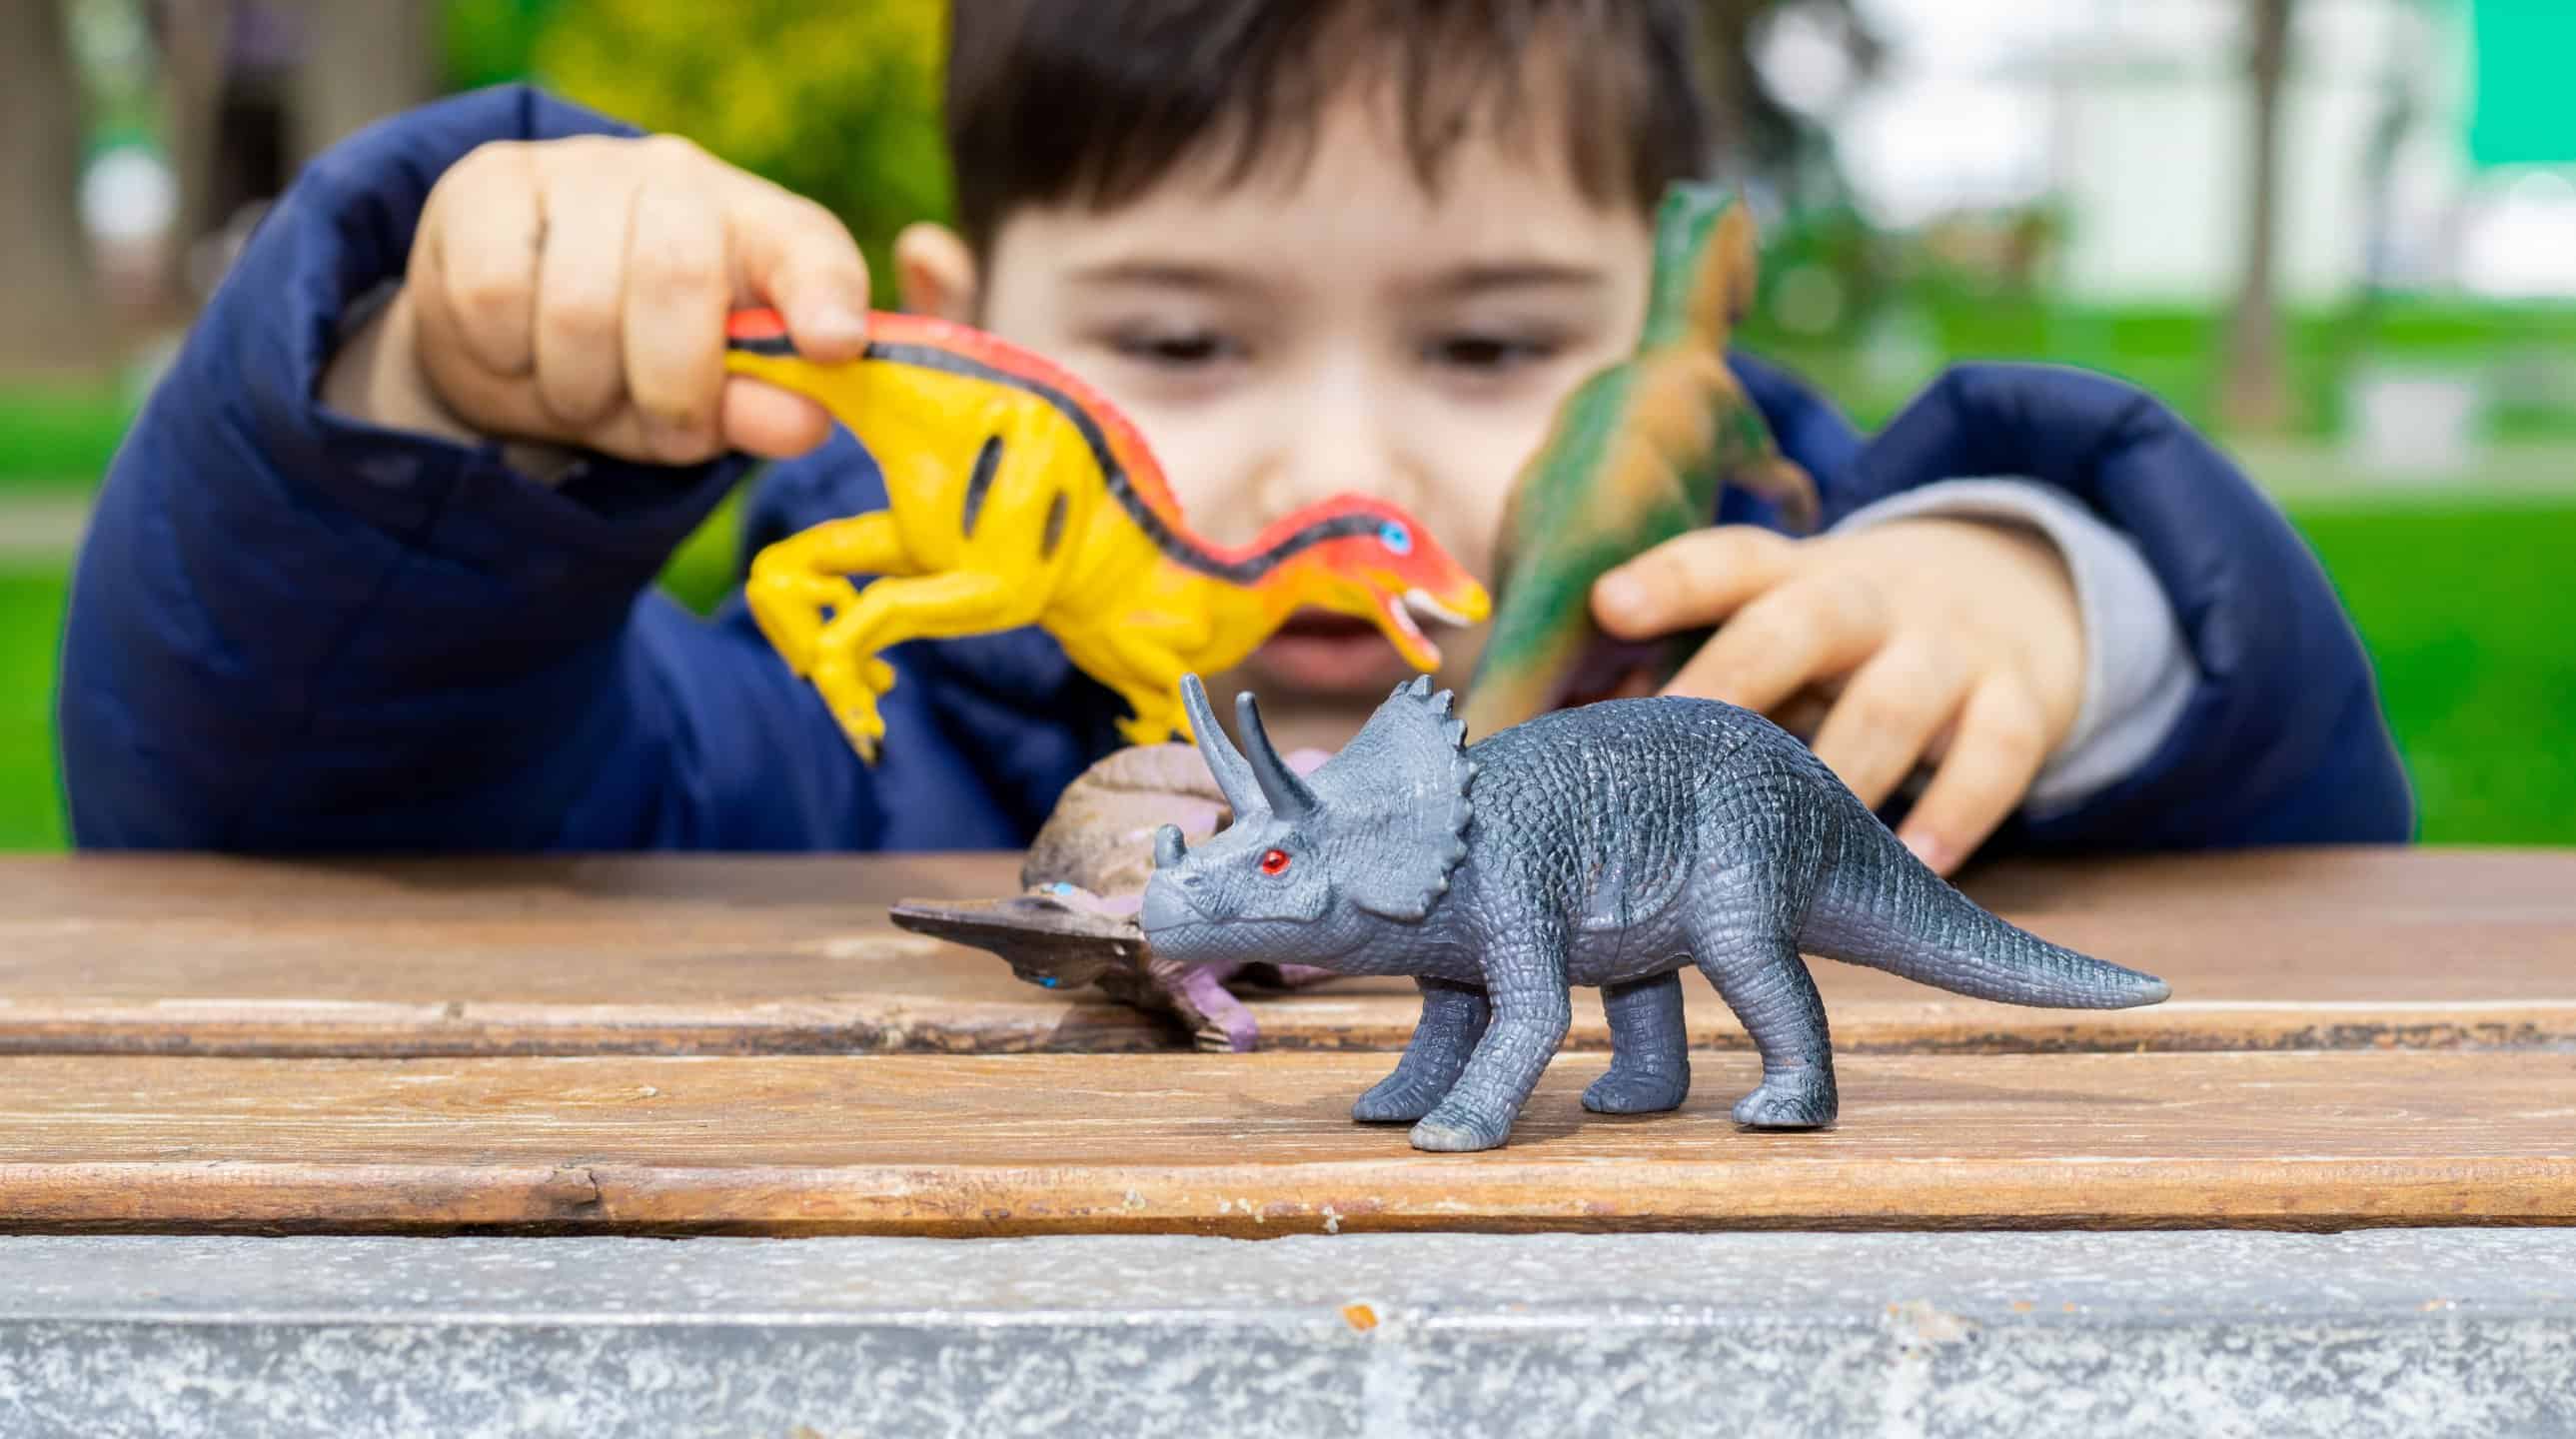 Boy plays with dinosaur toys on a table outside